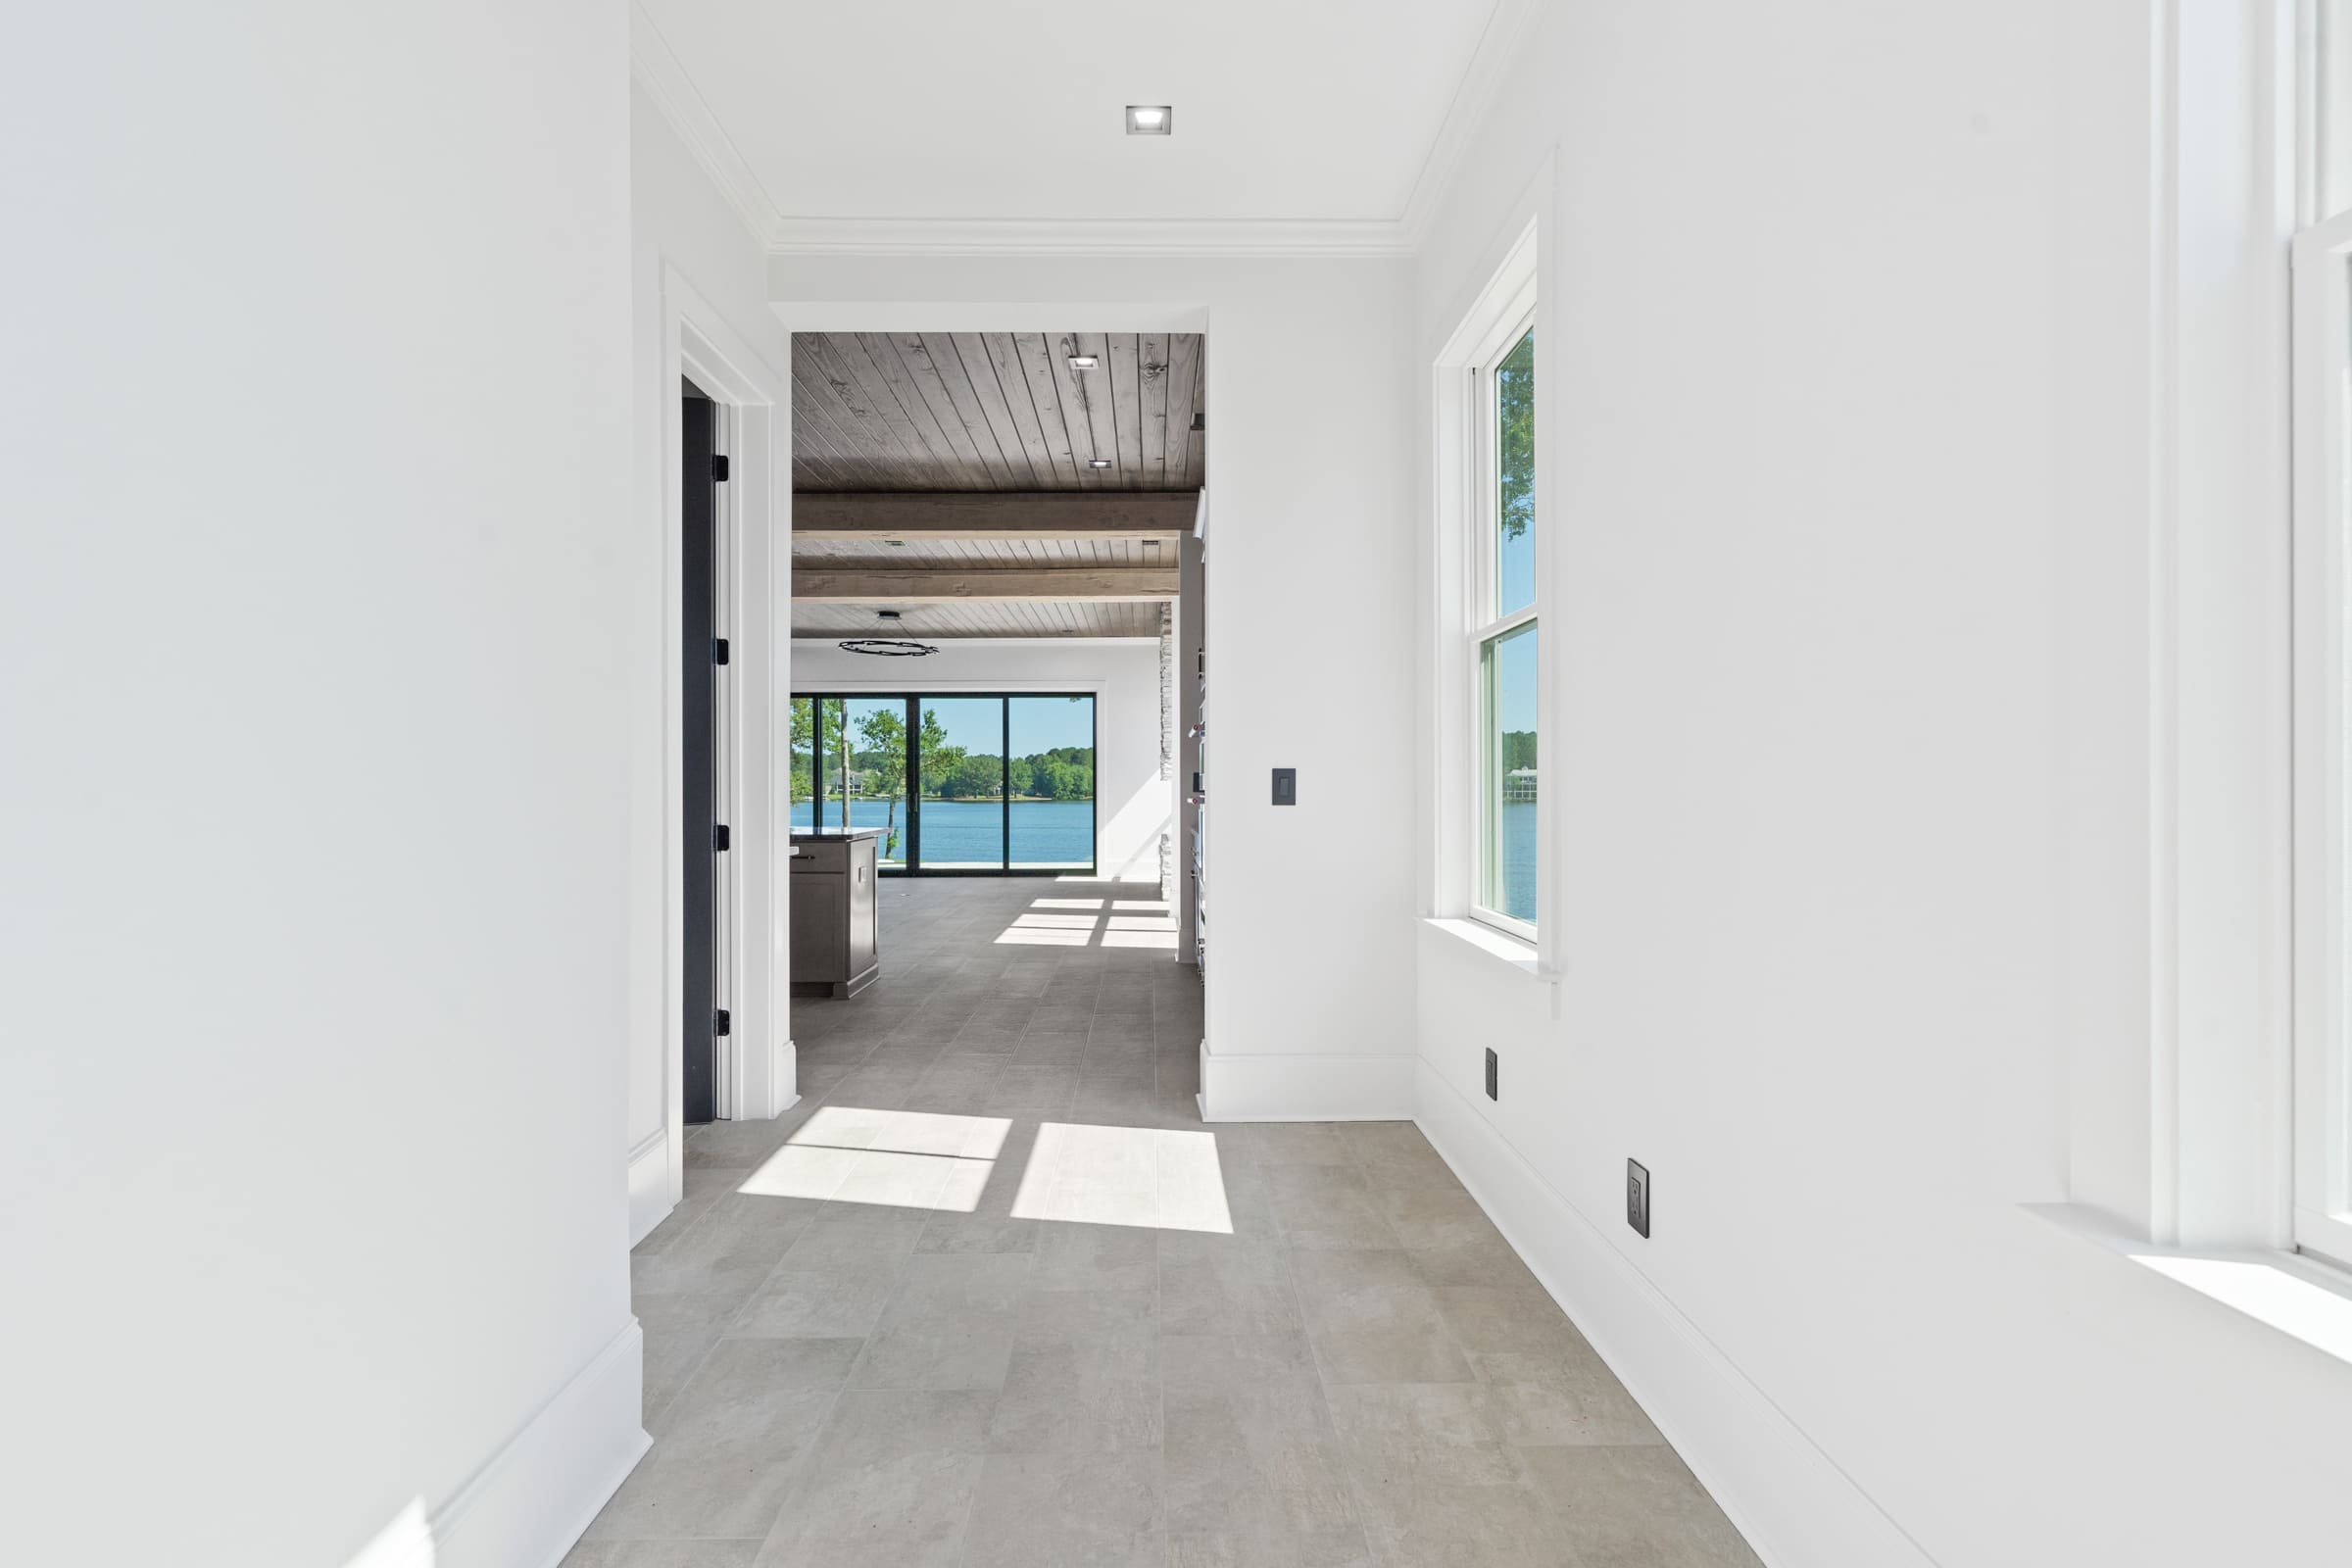 Entry-Way View |PAXISgroup